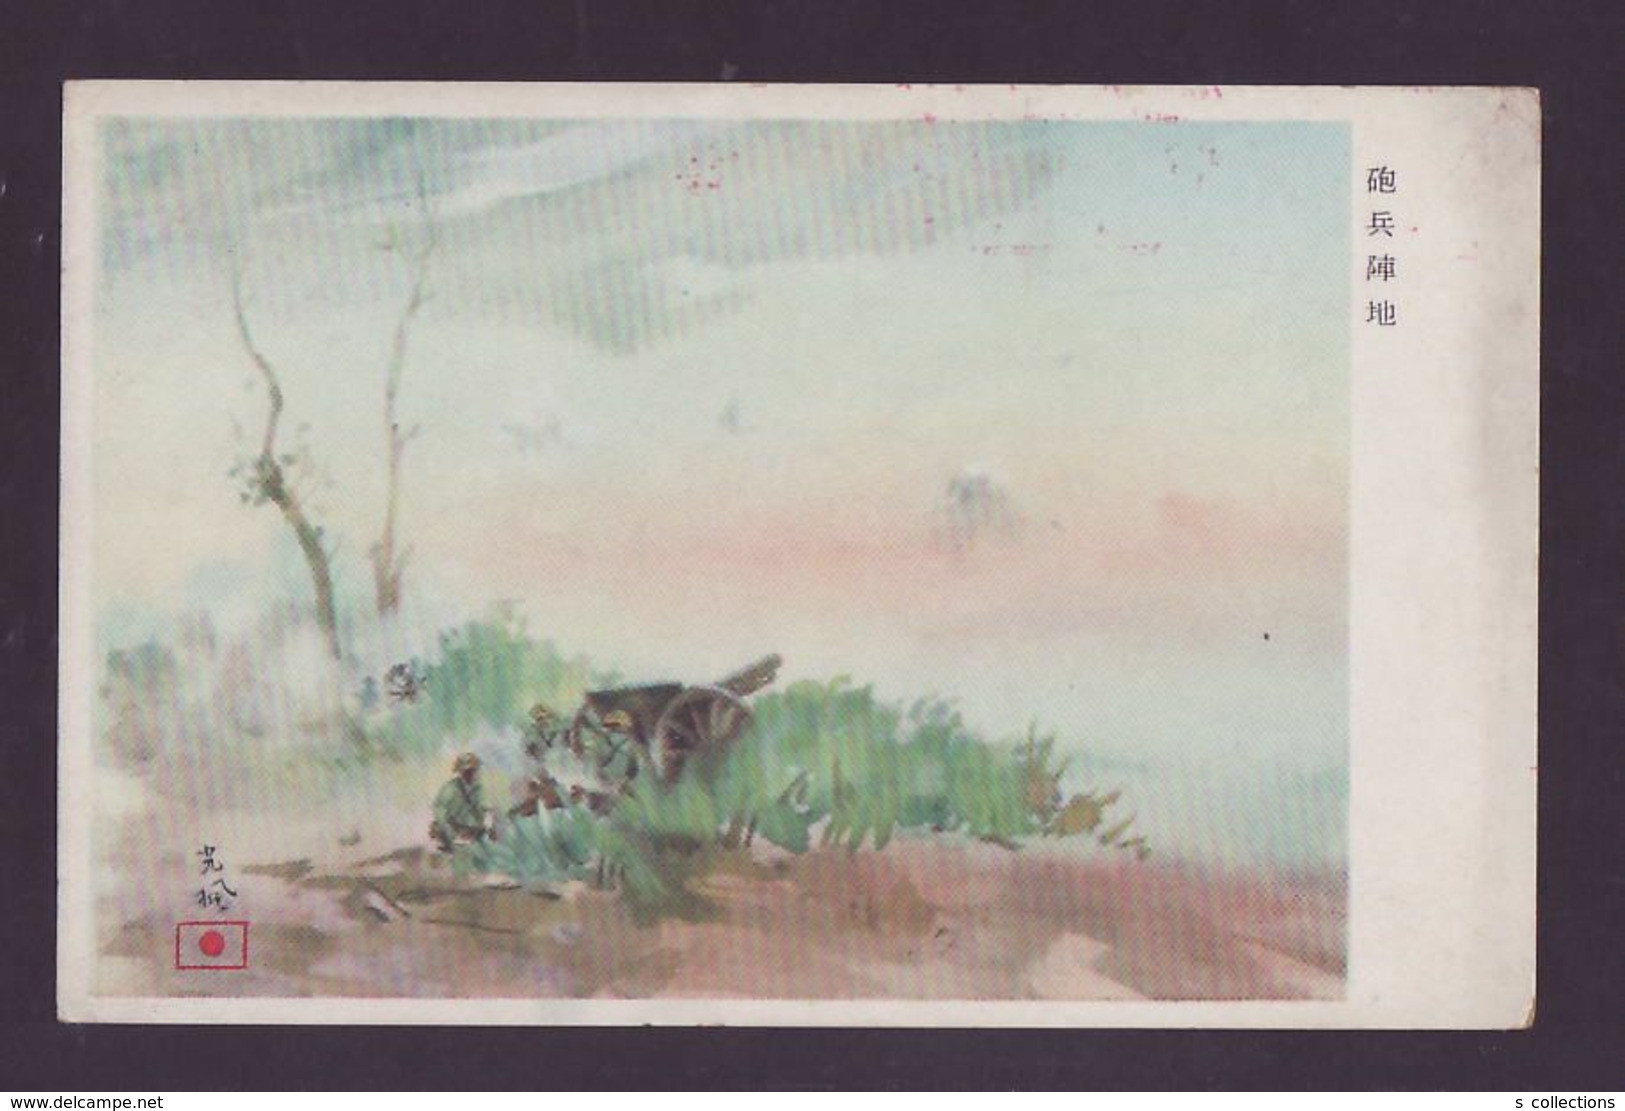 JAPAN WWII Military Japanese Soldier Picture Postcard South China WW2 MANCHURIA CHINE MANDCHOUKOUO JAPON GIAPPONE - 1941-45 Northern China